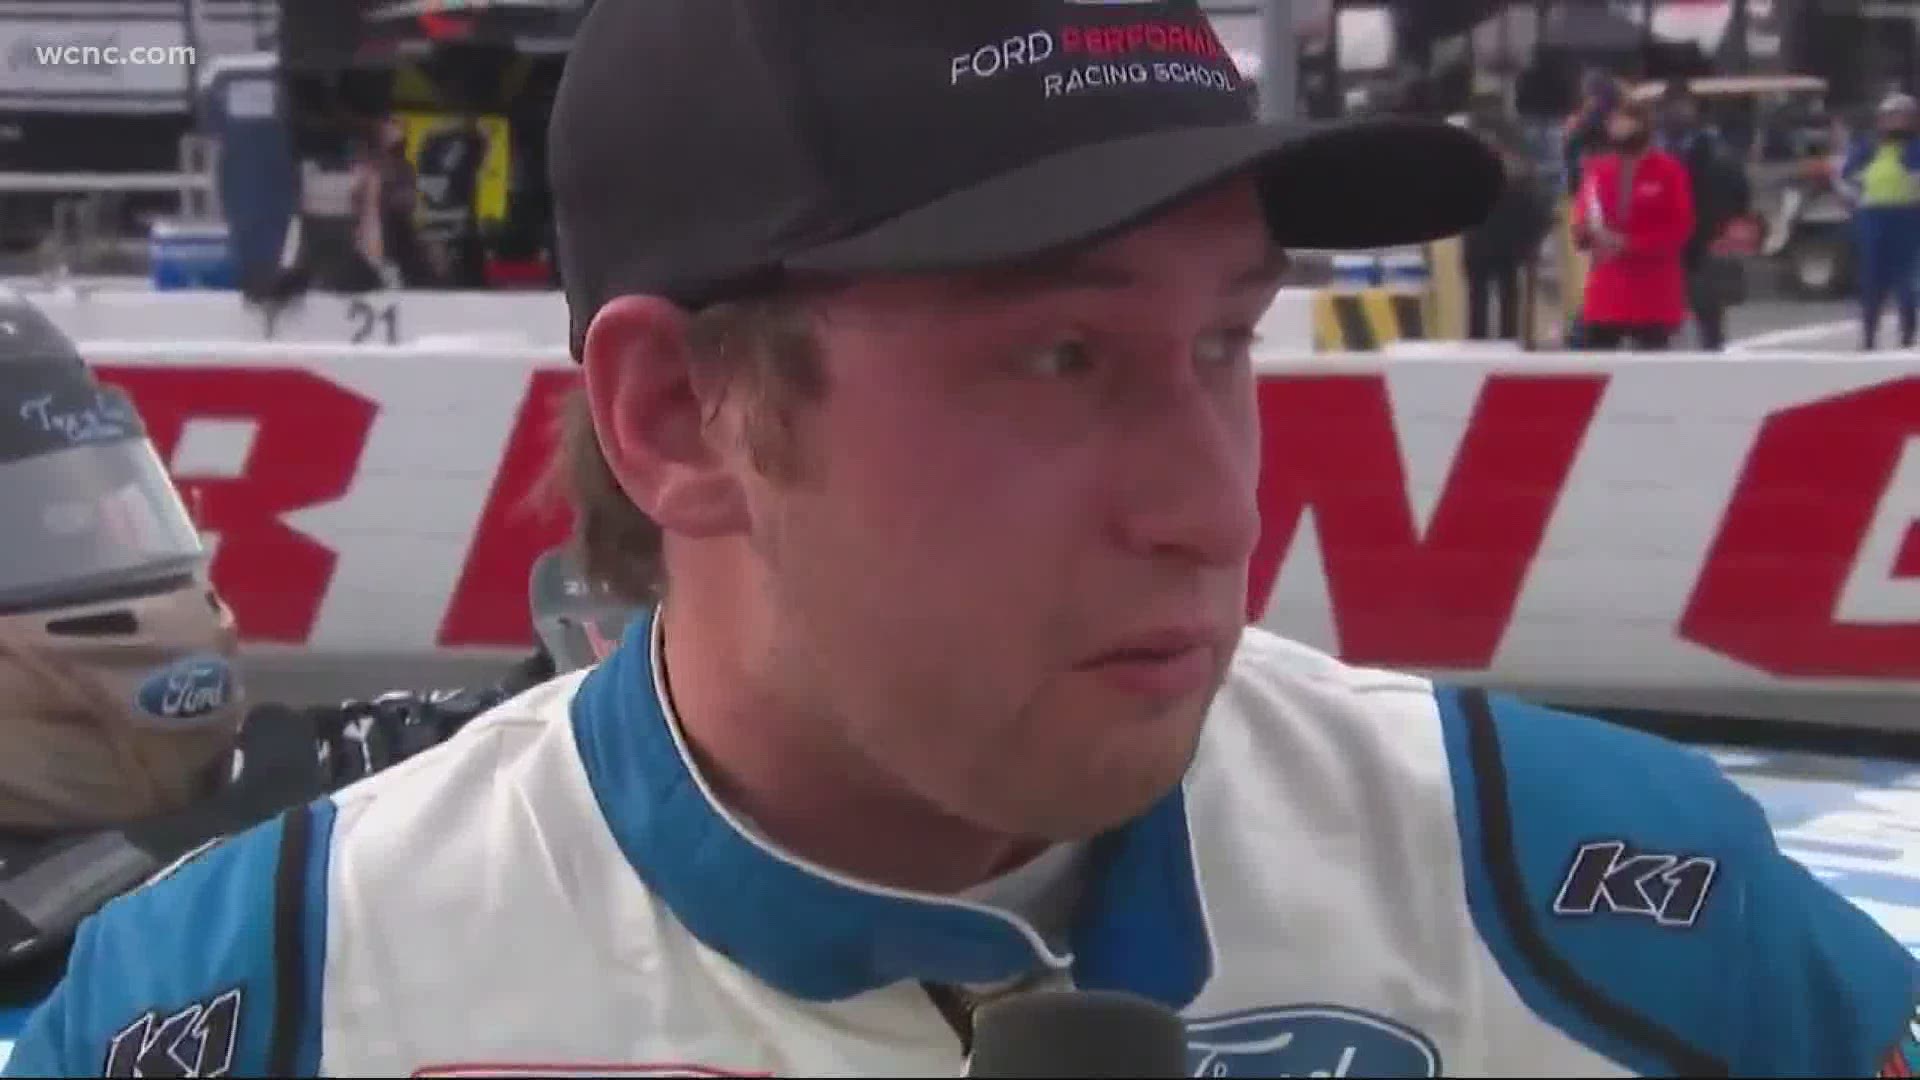 "God is so good, man," Chase Briscoe said through tears, just moments after holding off Kyle Busch to win at Darlington Thursday.